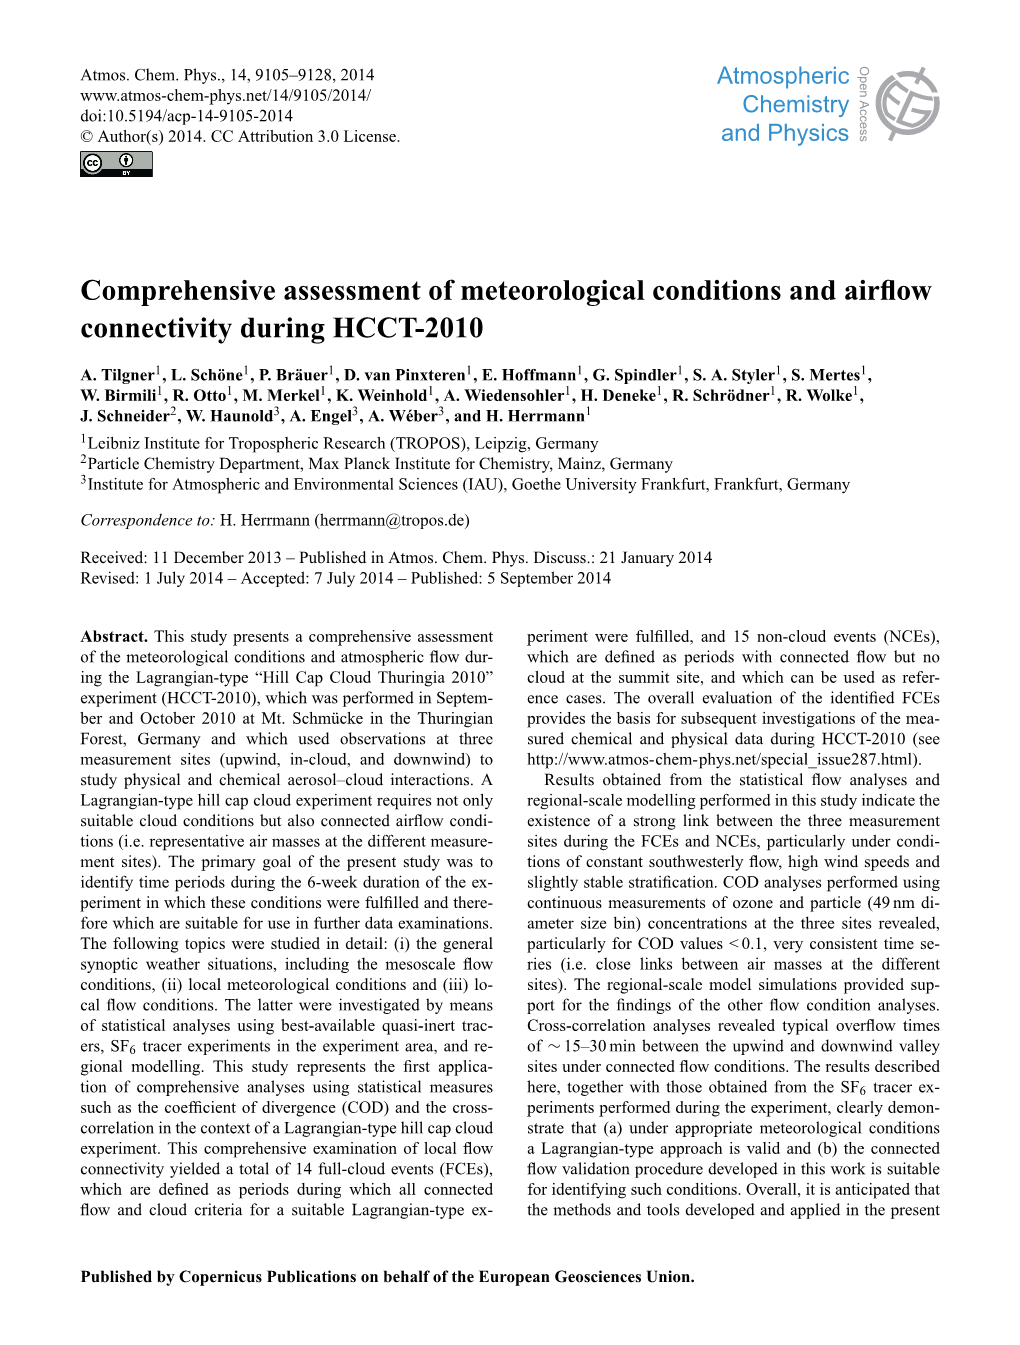 Comprehensive Assessment of Meteorological Conditions and Airﬂow Connectivity During HCCT-2010